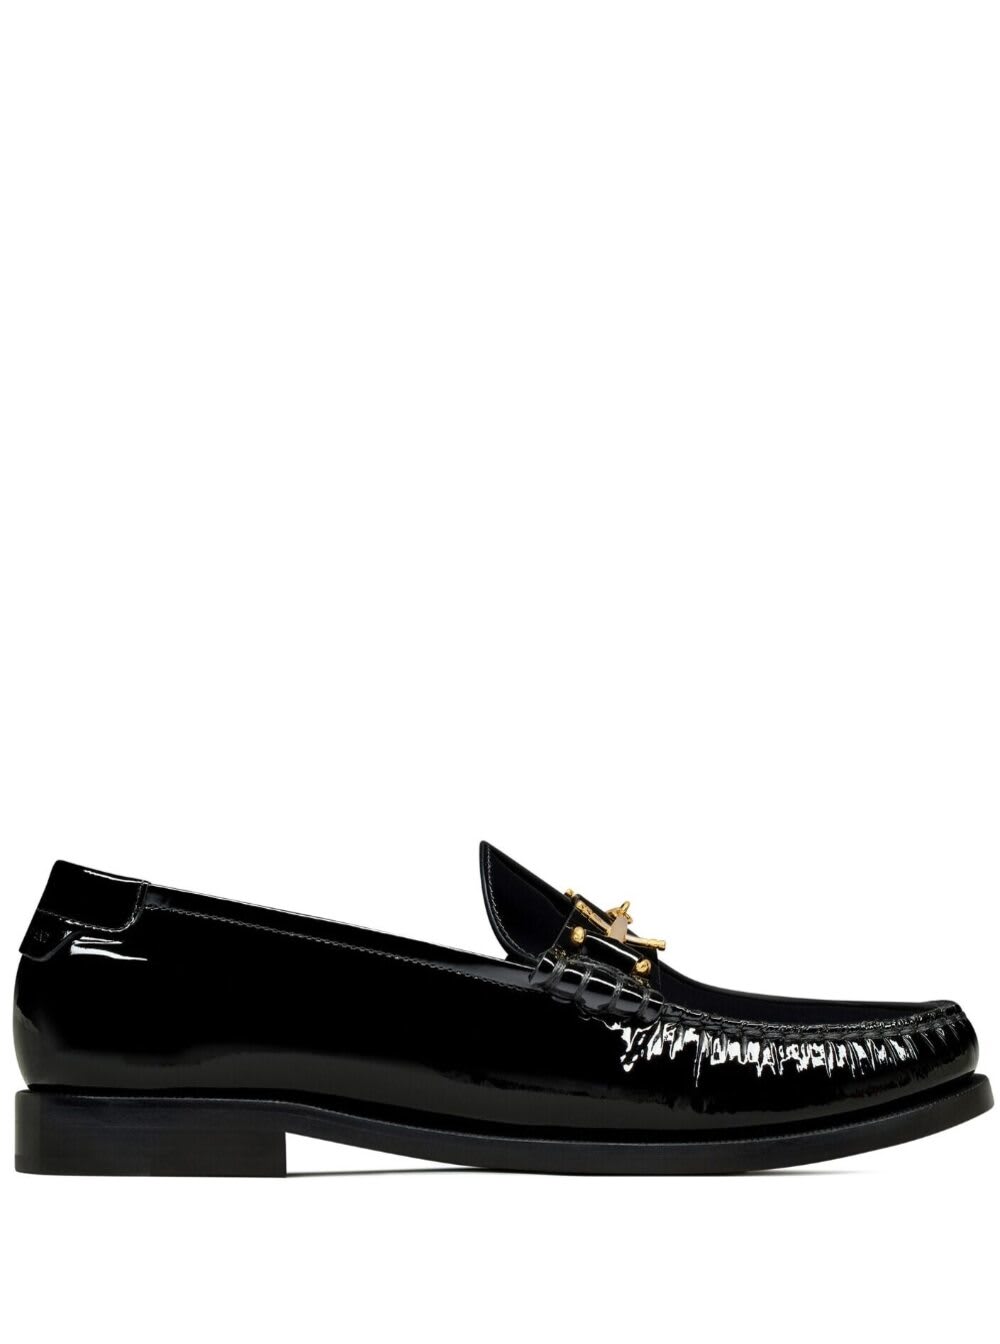 Le Loafer Penny Slippers In Black Patent Leather Woman